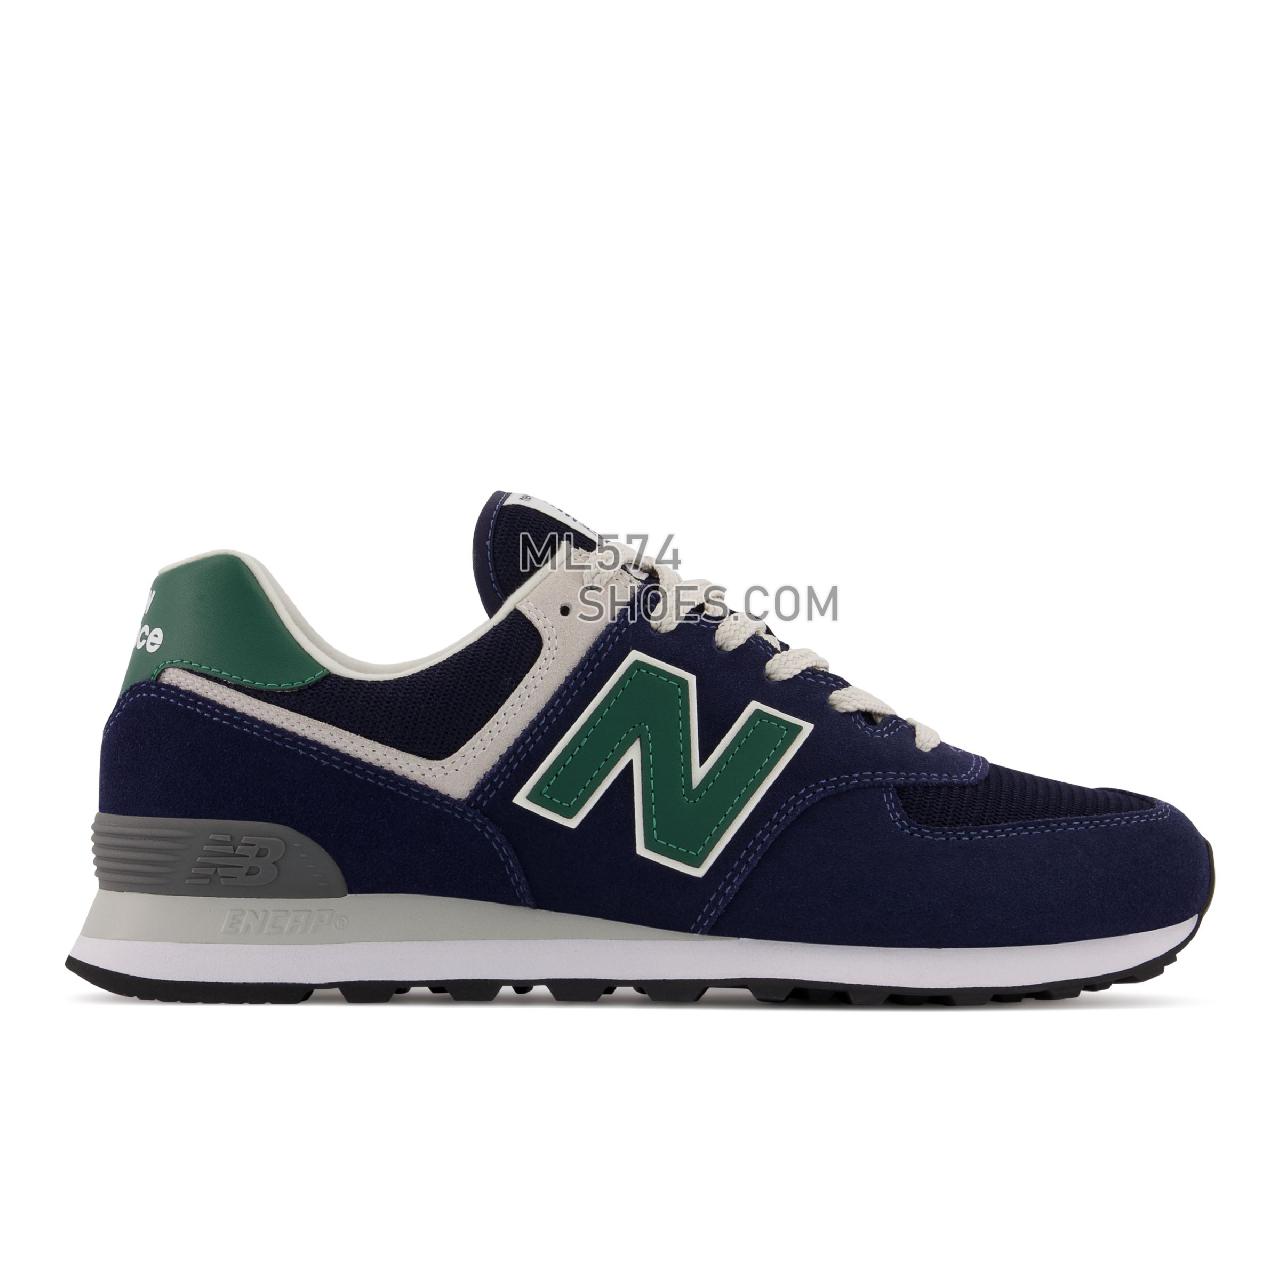 New Balance 574v2 - Men's Classic Sneakers - Navy with Green - ML574HL2